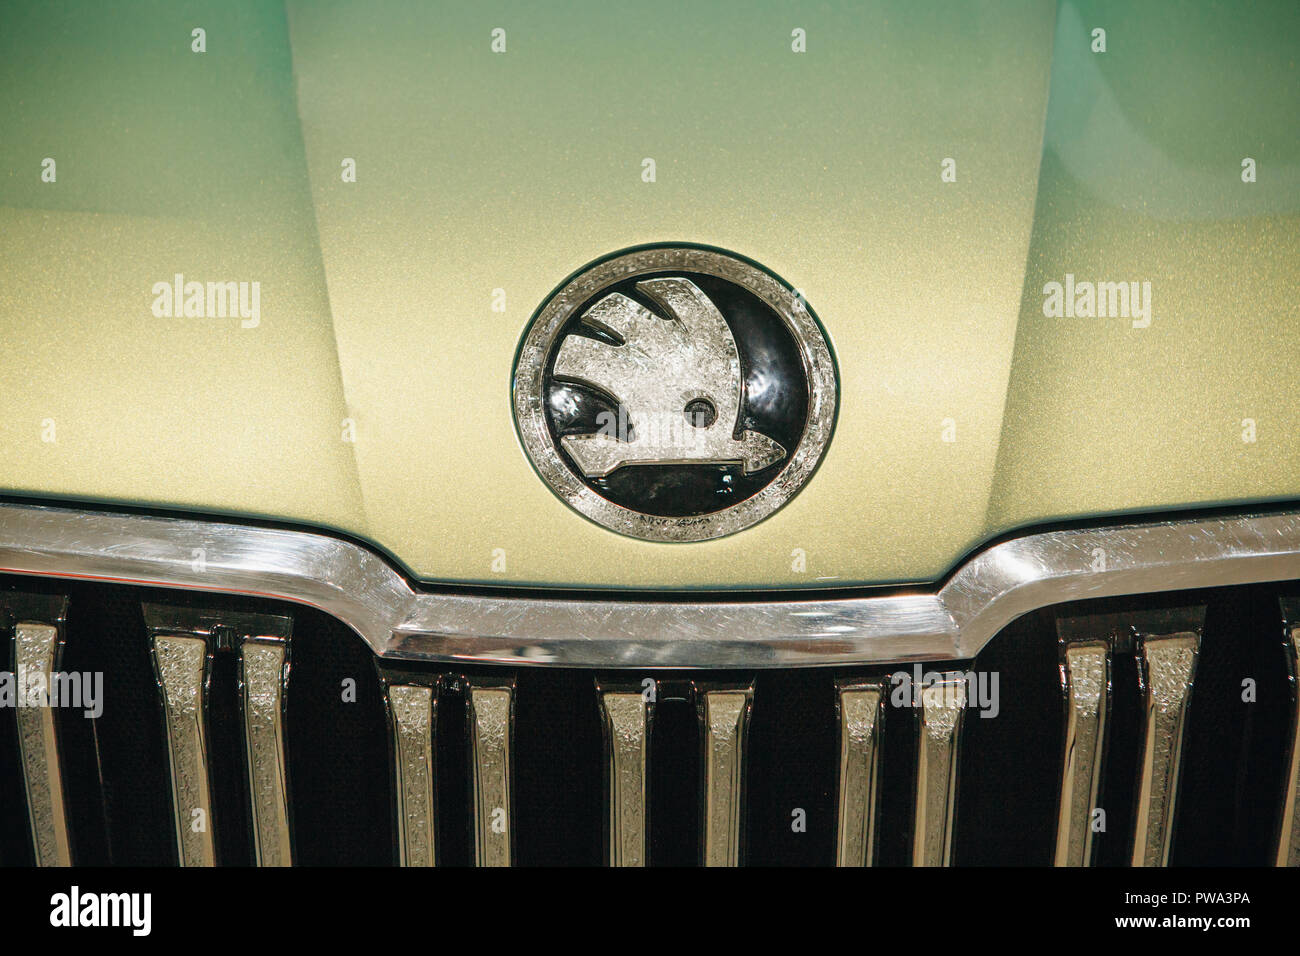 Berlin, August 29, 2018: Close-up front part of a new car Skoda Vision S. Skoda emblem. Stock Photo